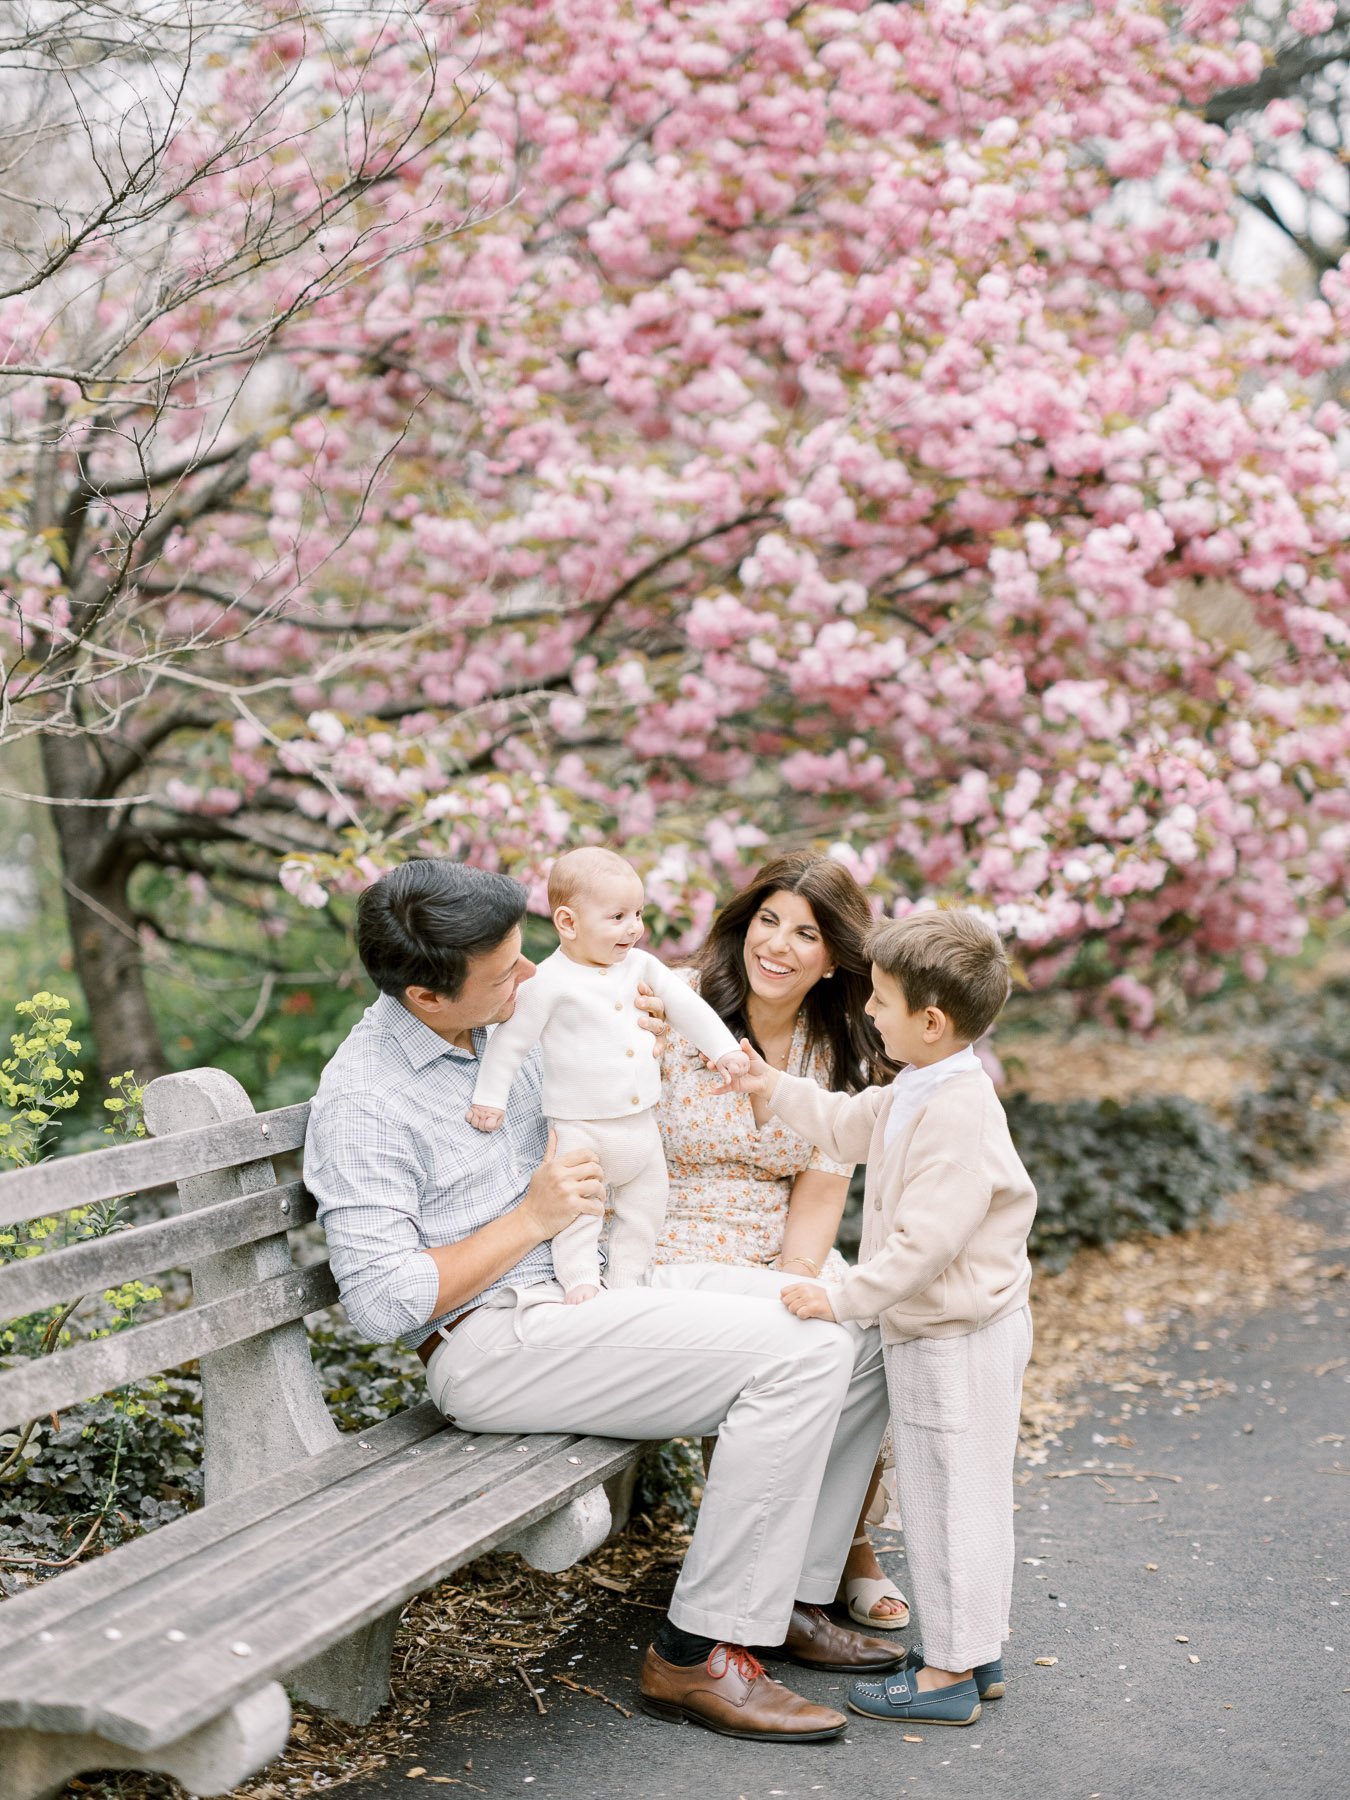 NYC Blossom family portraits by Michelle Lange Photography-13.jpg